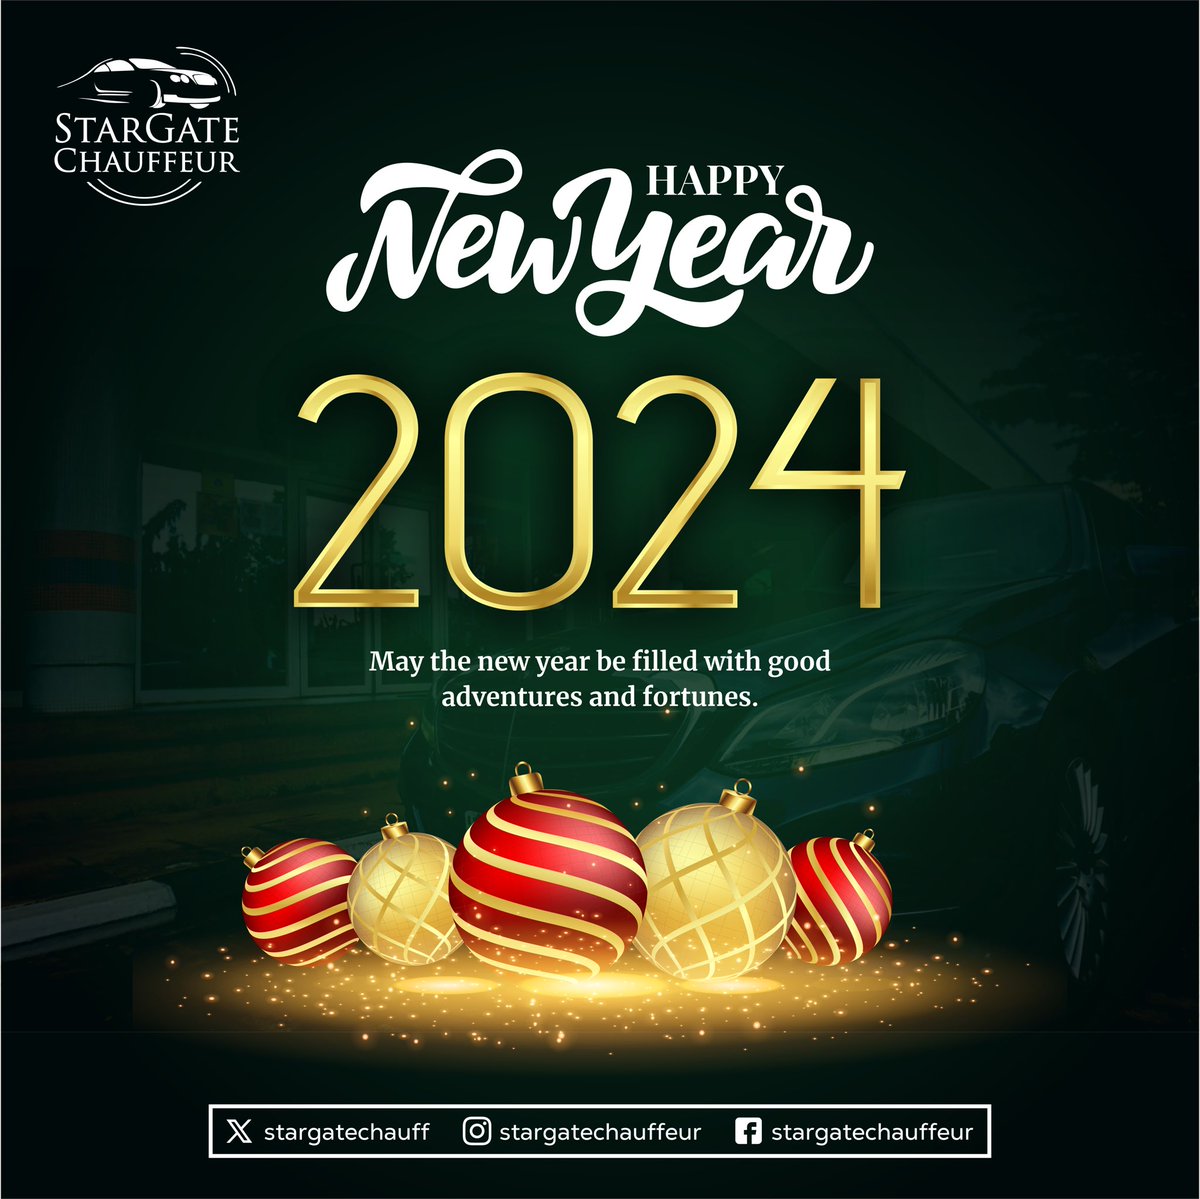 Cruising into the New Year with top-notch chauffeur service and smiles on the road! 🚗✨ 
Here’s to a journey filled with joy and luxury 🥂 

Happy New Year 🎆❤️

#stargatechauffeur #chauffeurinlagos #carhirelagos #happynewyear2024